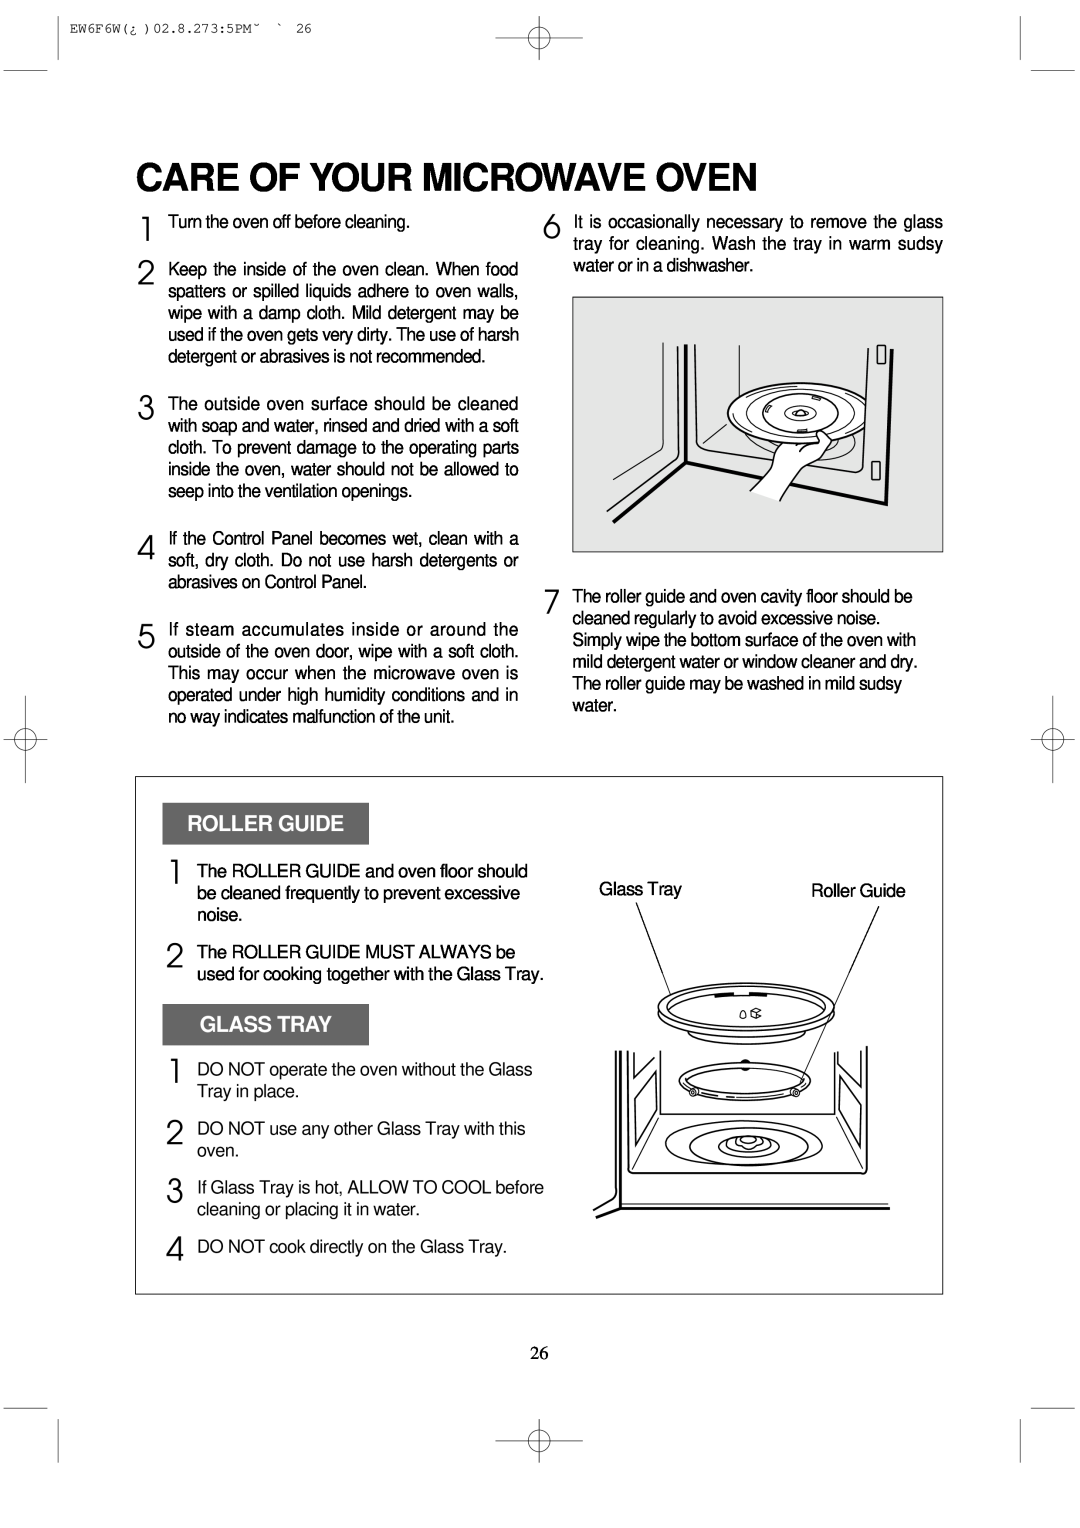 Magic Chef MCD760W instruction manual Care Of Your Microwave Oven, Roller Guide, Glass Tray 